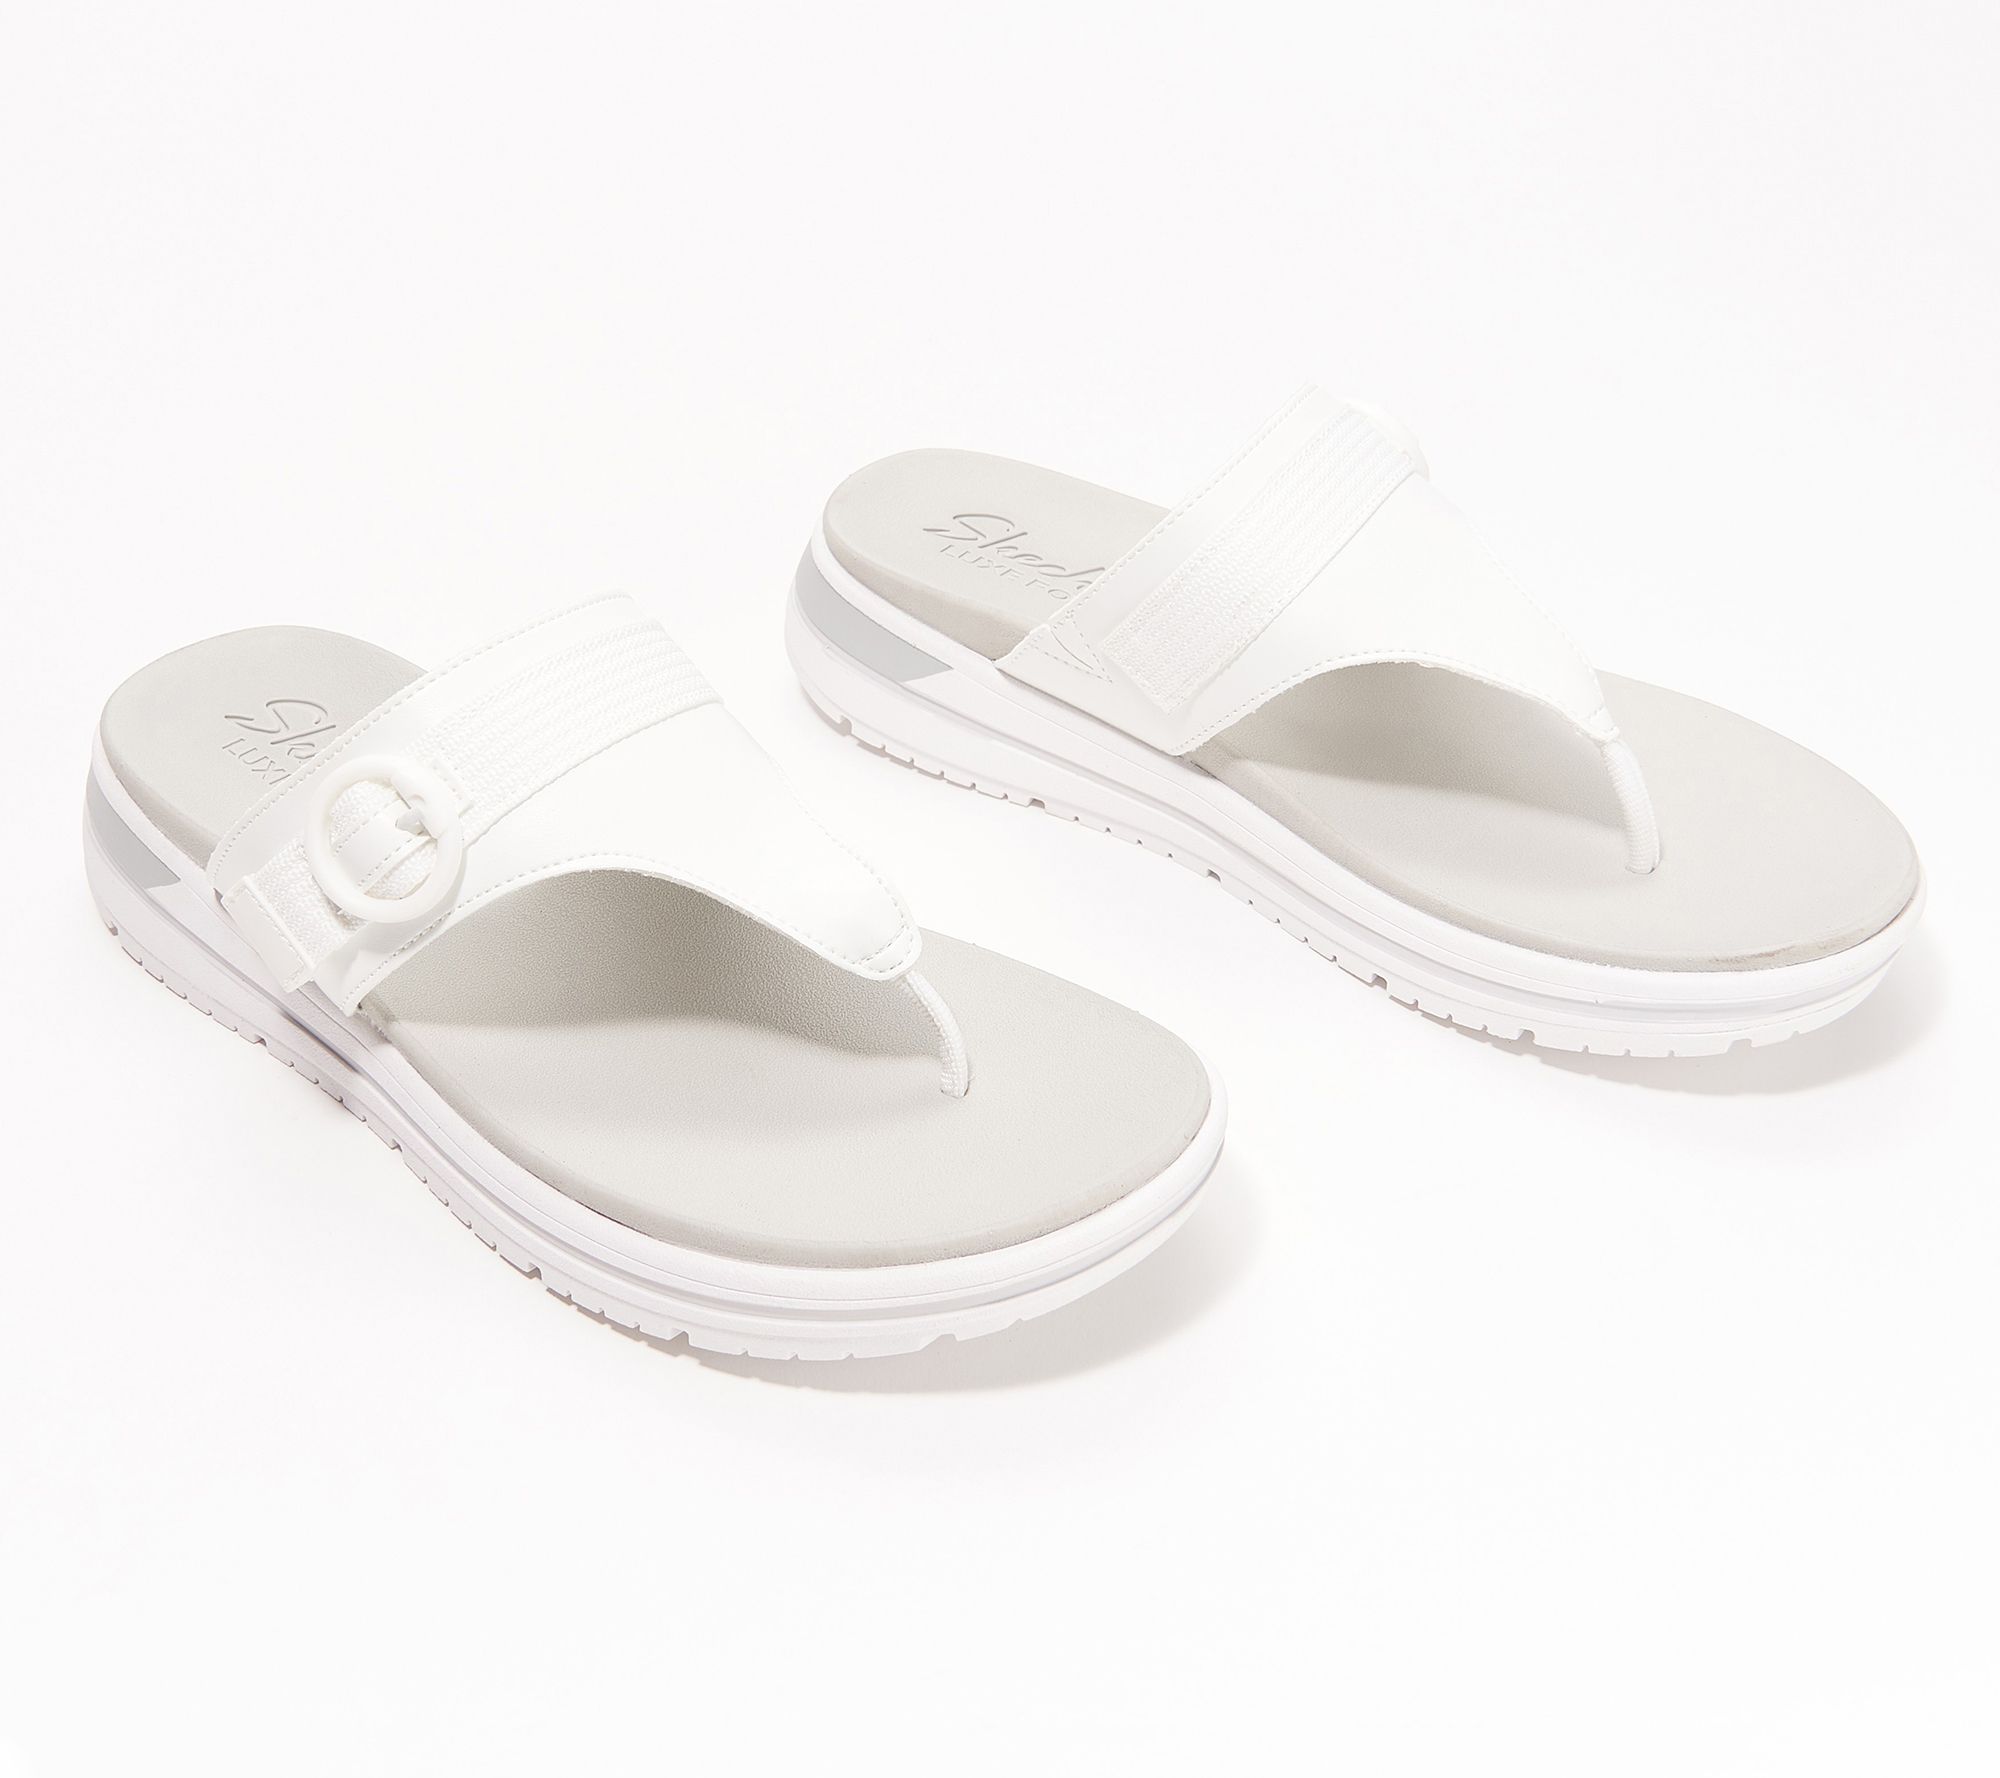 Skechers Hooded Thong Sandals - Intergrades Smooth Cruise - QVC.com